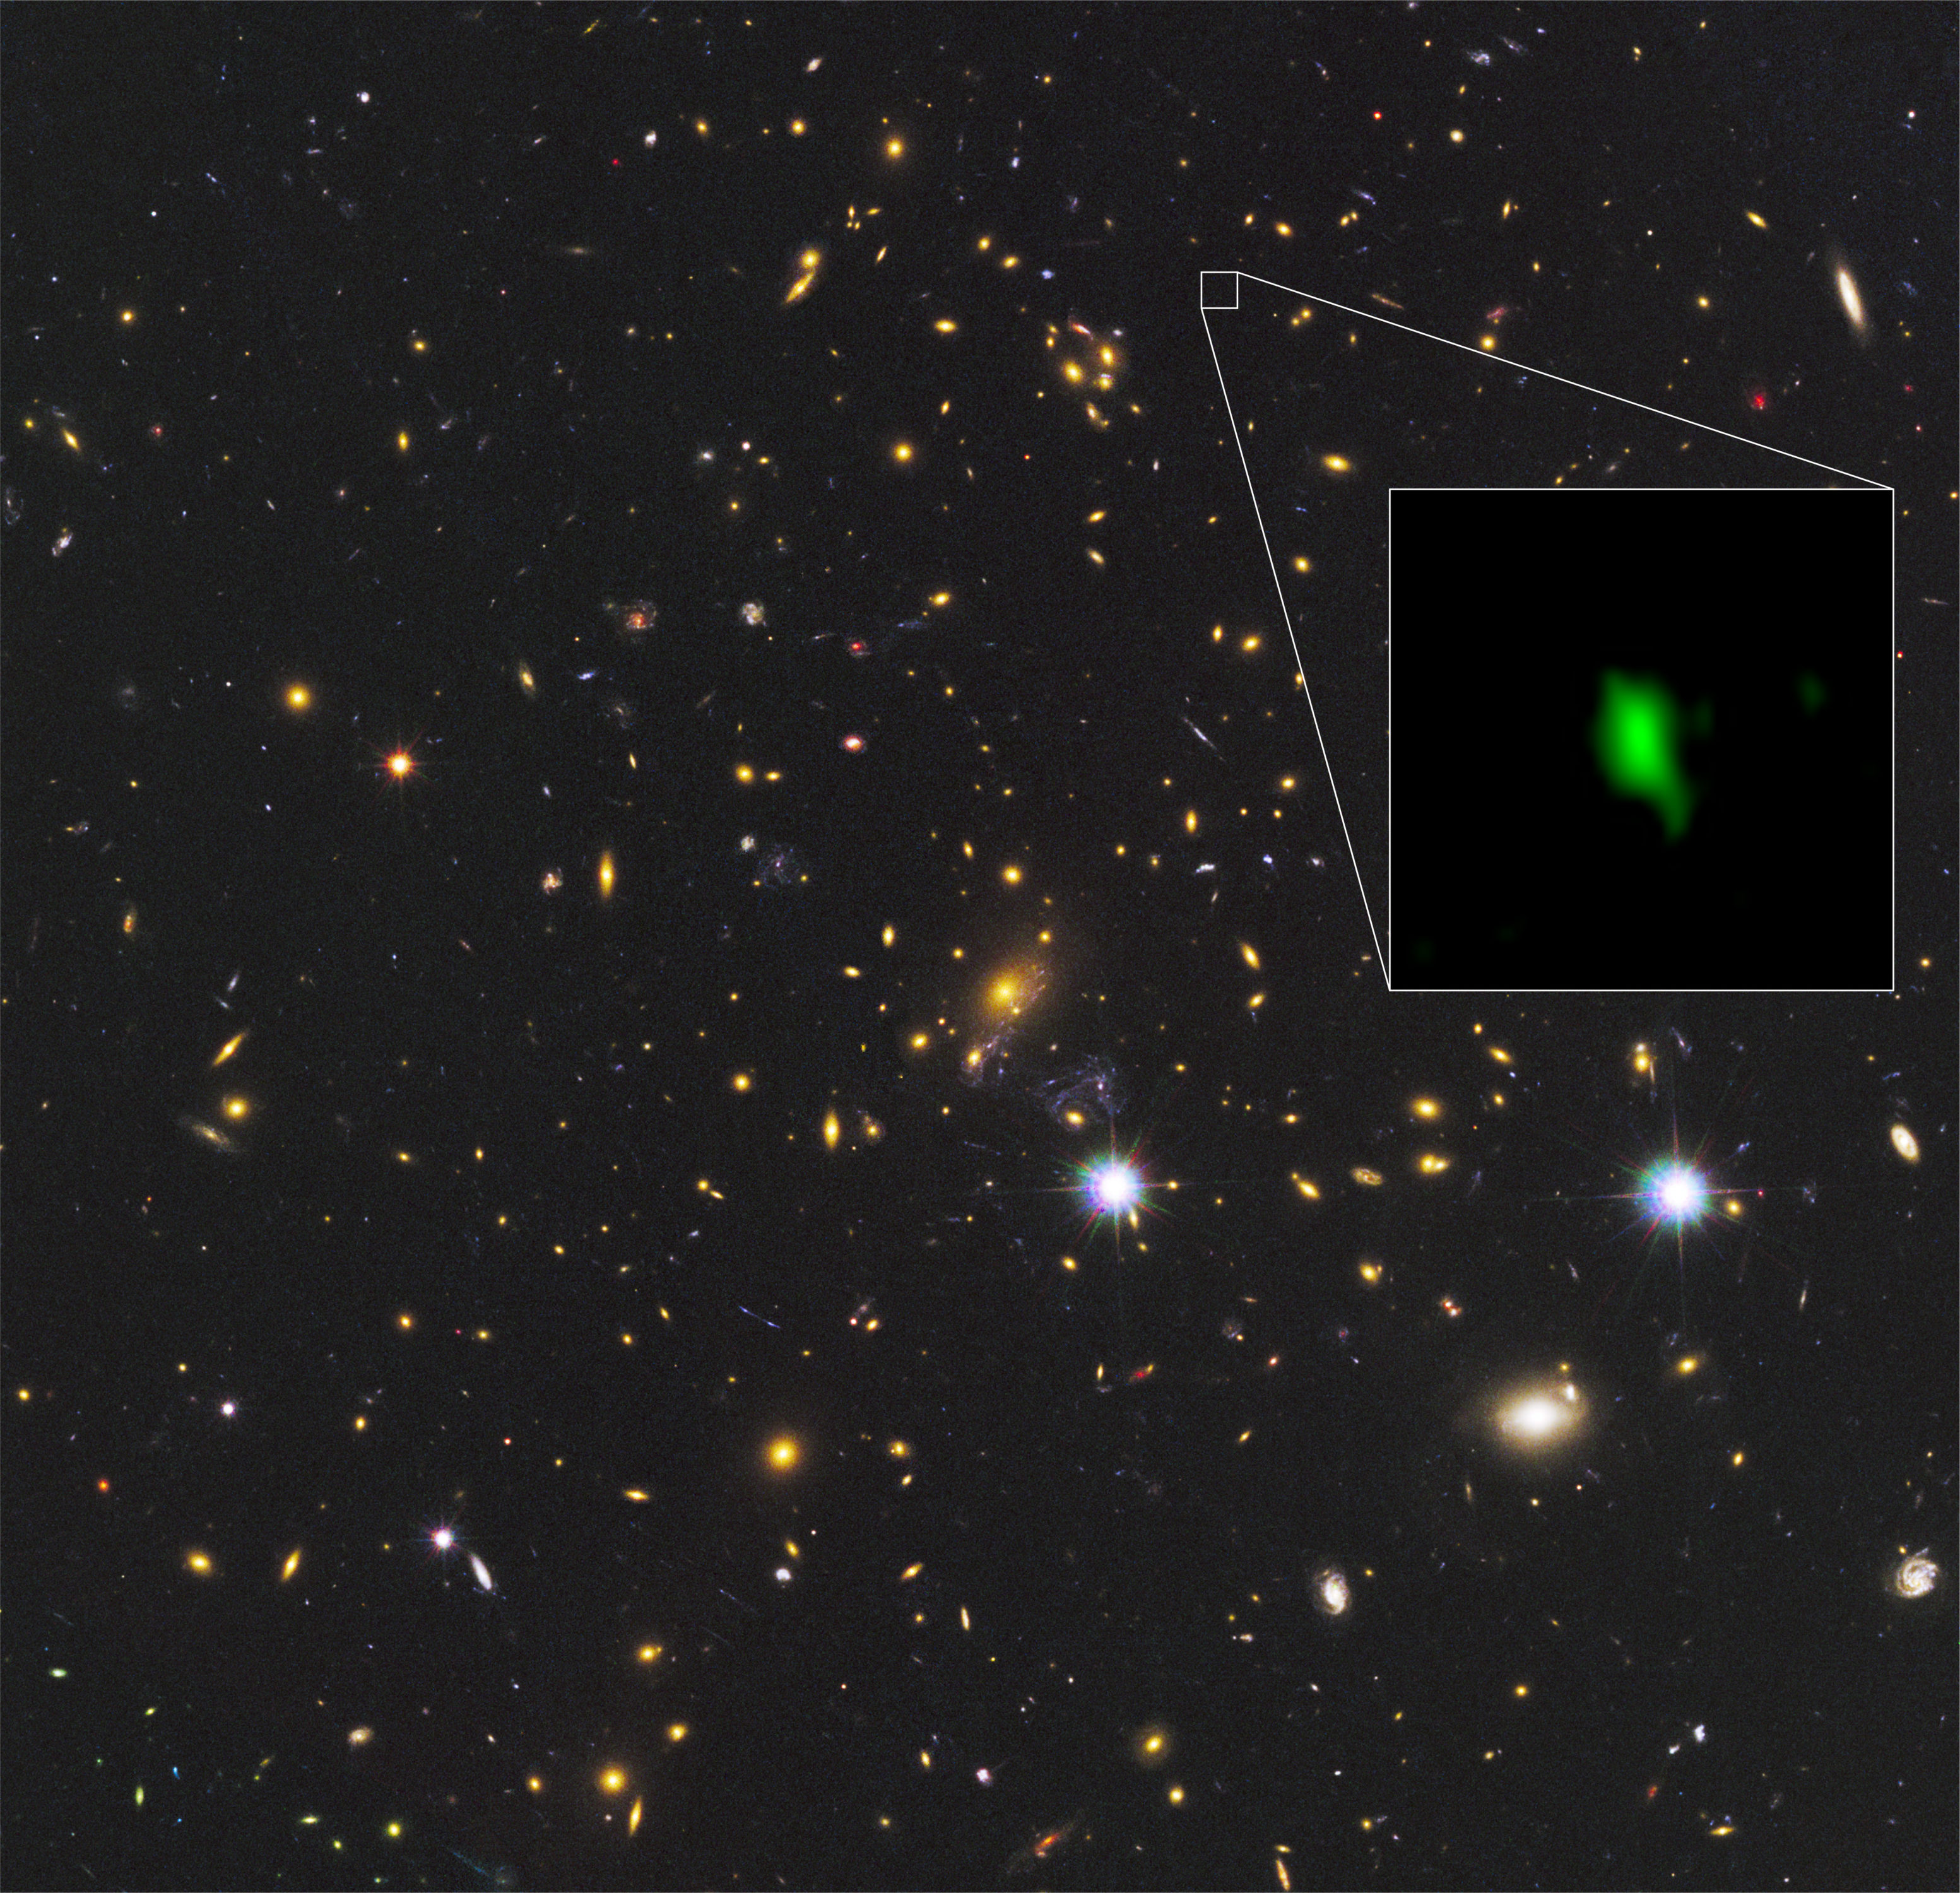 This image shows the galaxy cluster MACS J1149.5+2223 taken with the NASA/ESA Hubble Space Telescope and the inset image is the galaxy MACS1149-JD1 located 13.28 billion light-years away observed with ALMA. Here, the oxygen distribution detected with ALMA is depicted in green. Credit: ALMA (ESO/NAOJ/NRAO), NASA/ESA Hubble Space Telescope, W. Zheng (JHU), M. Postman (STScI), the CLASH Team, Hashimoto et al.